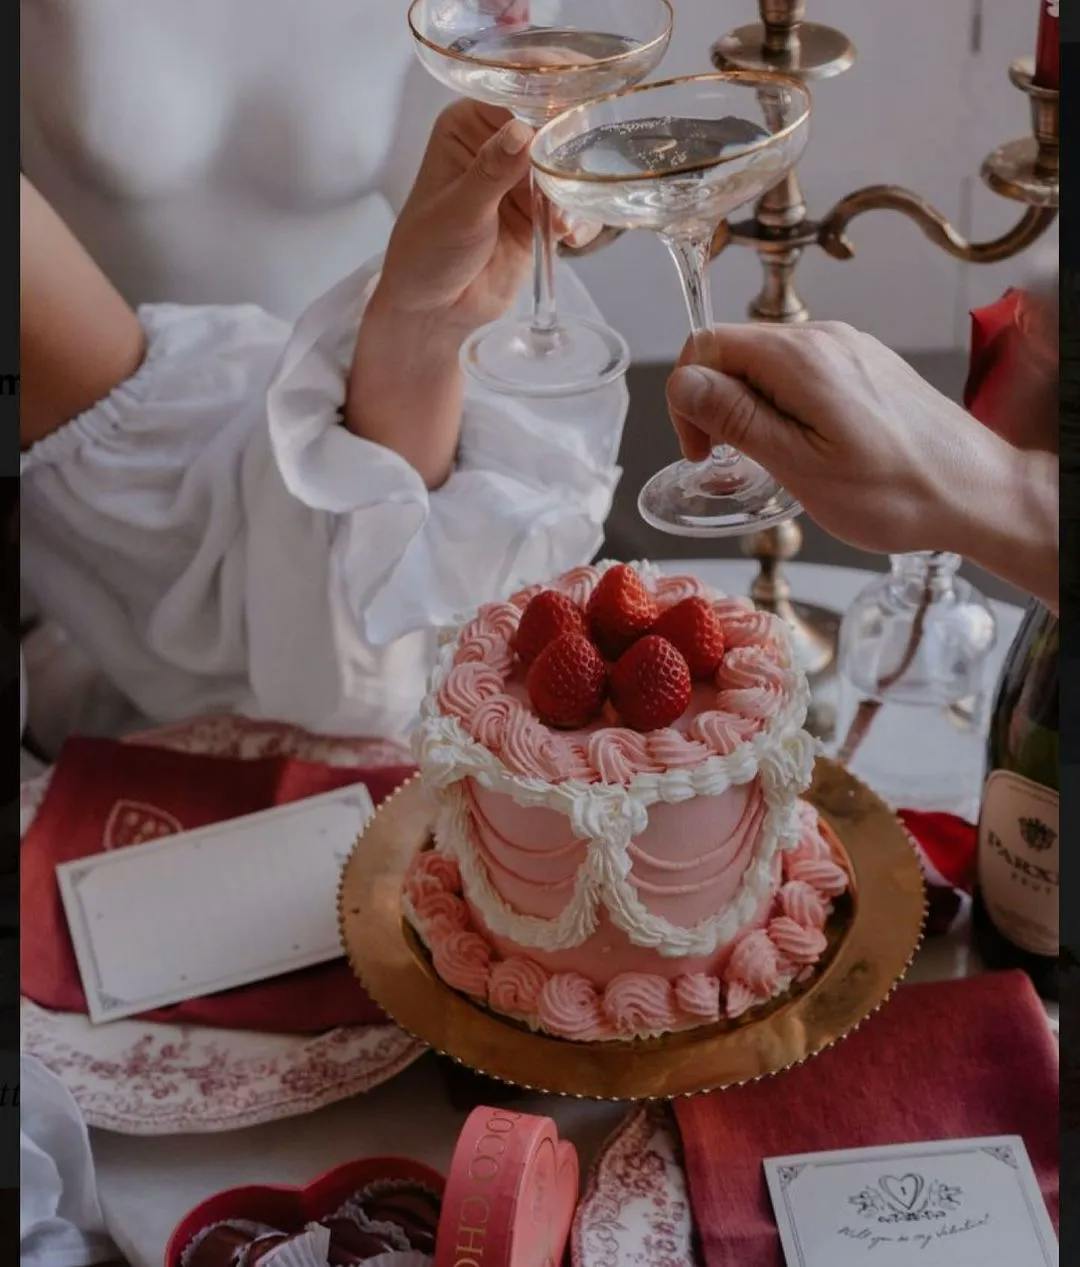 Cake and champagne on a table